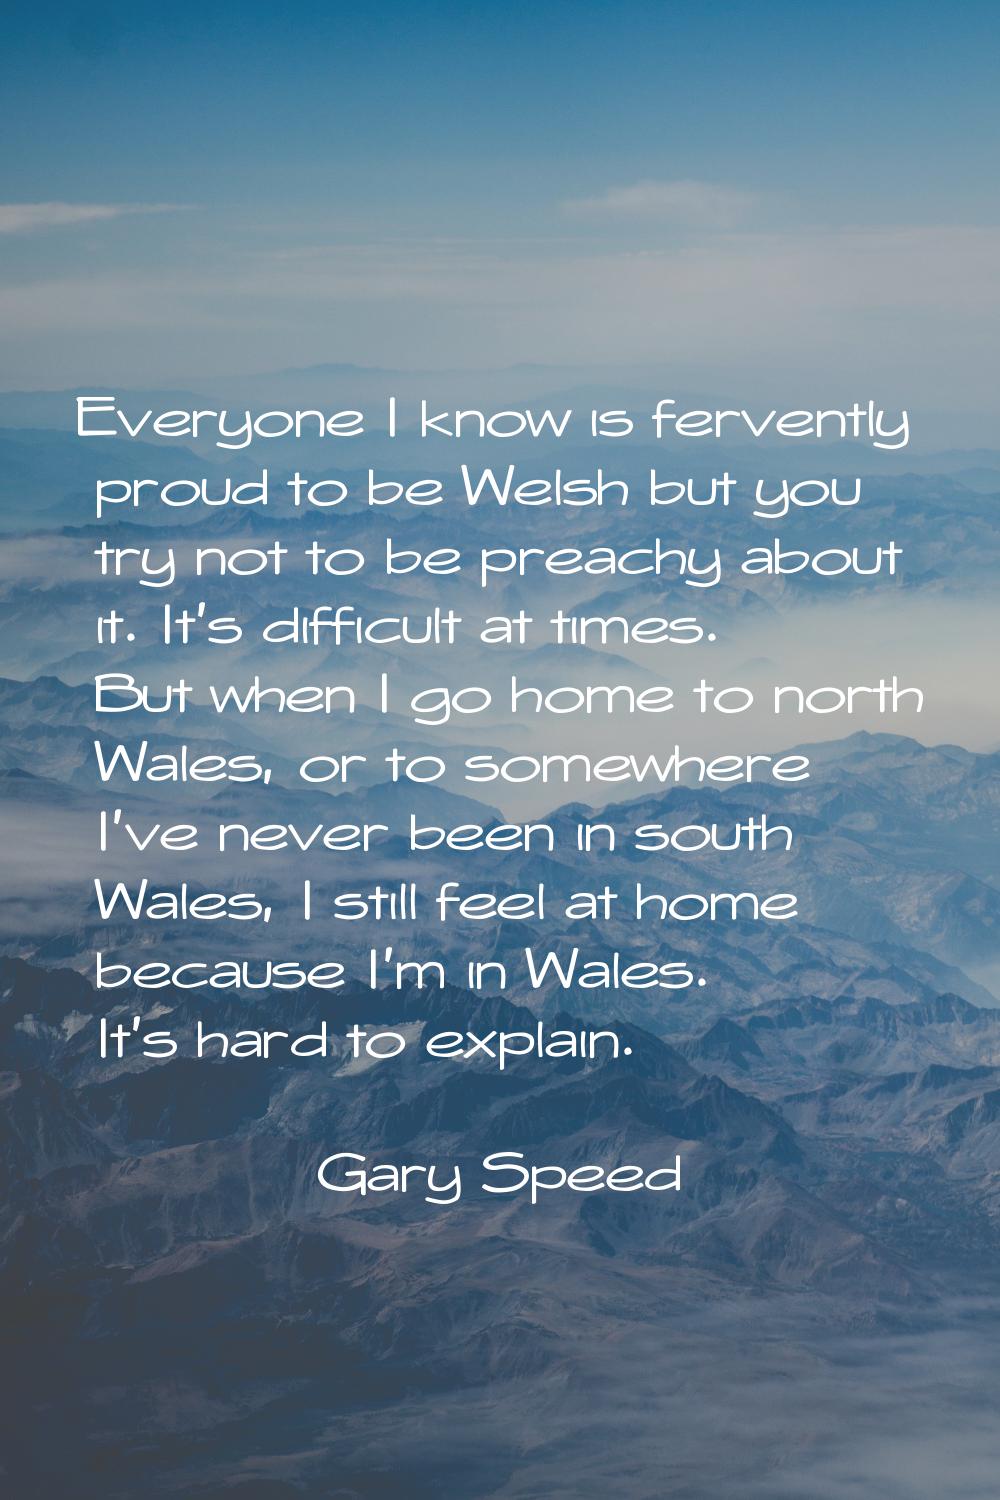 Everyone I know is fervently proud to be Welsh but you try not to be preachy about it. It's difficu